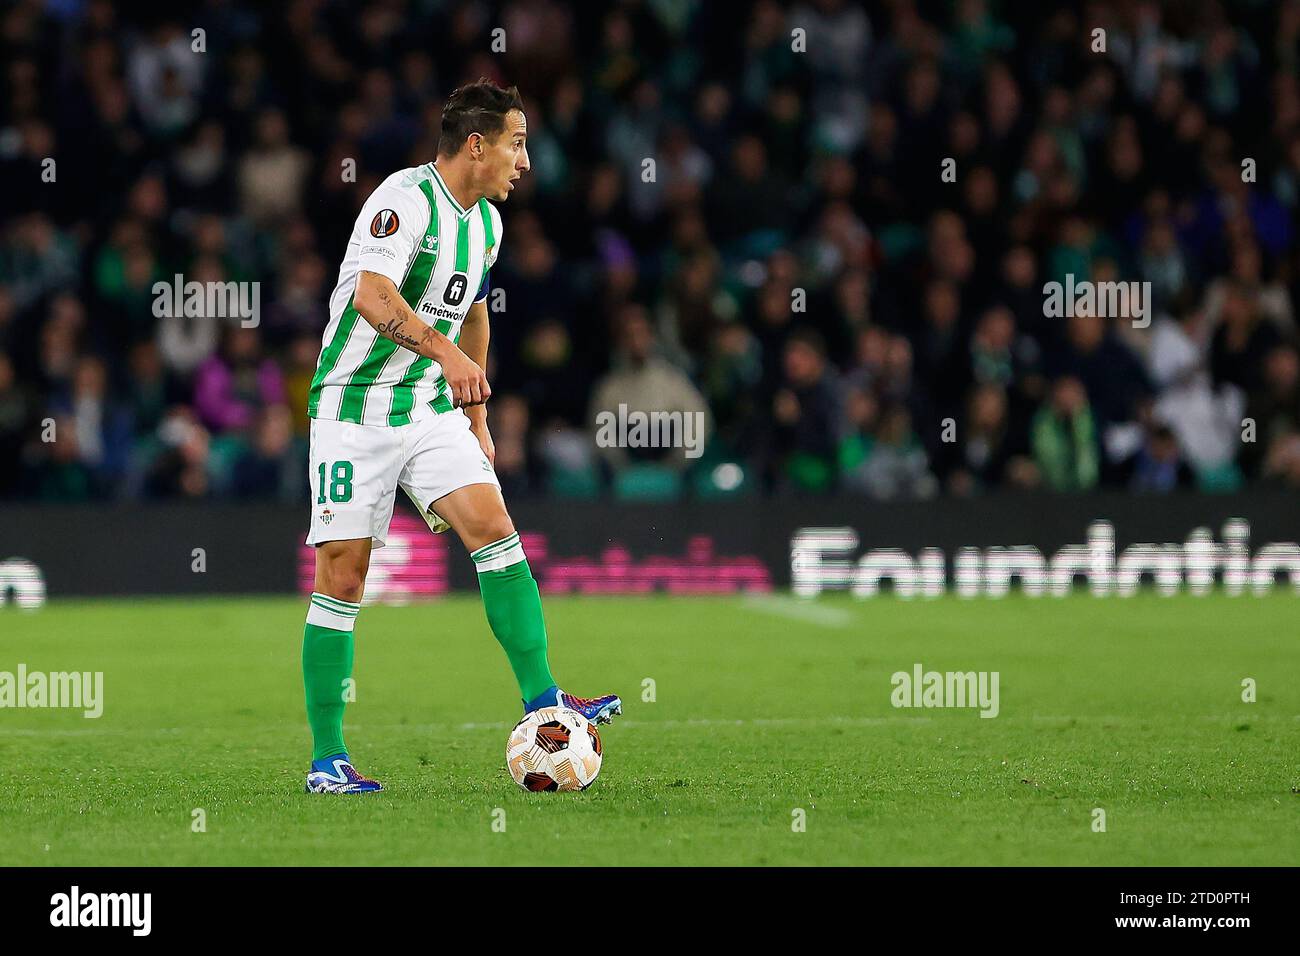 Seville, Spain. 14th December 2023. Andres Guardado (18) of Real Betis seen during the UEFA Europa League match between Real Betis and Rangers at the Estadio Benito Villamarin in Seville. (Photo credit: Gonzales Photo - Andres Gongora). Credit: Gonzales Photo/Alamy Live News Stock Photo